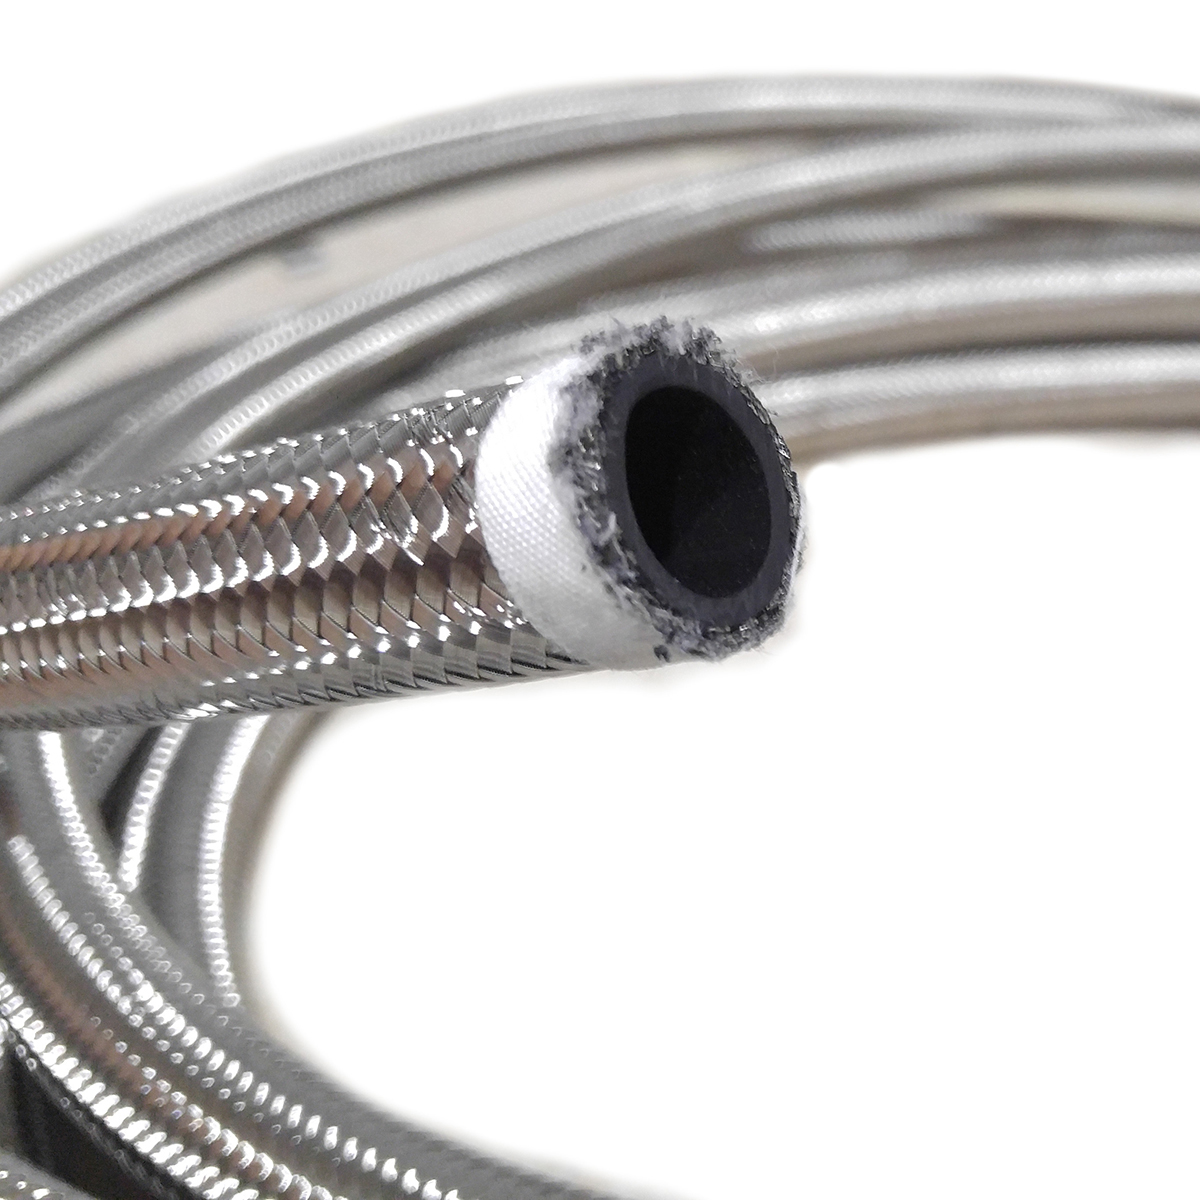 Stainless Steel Braided Hose (50 Foot Roll)